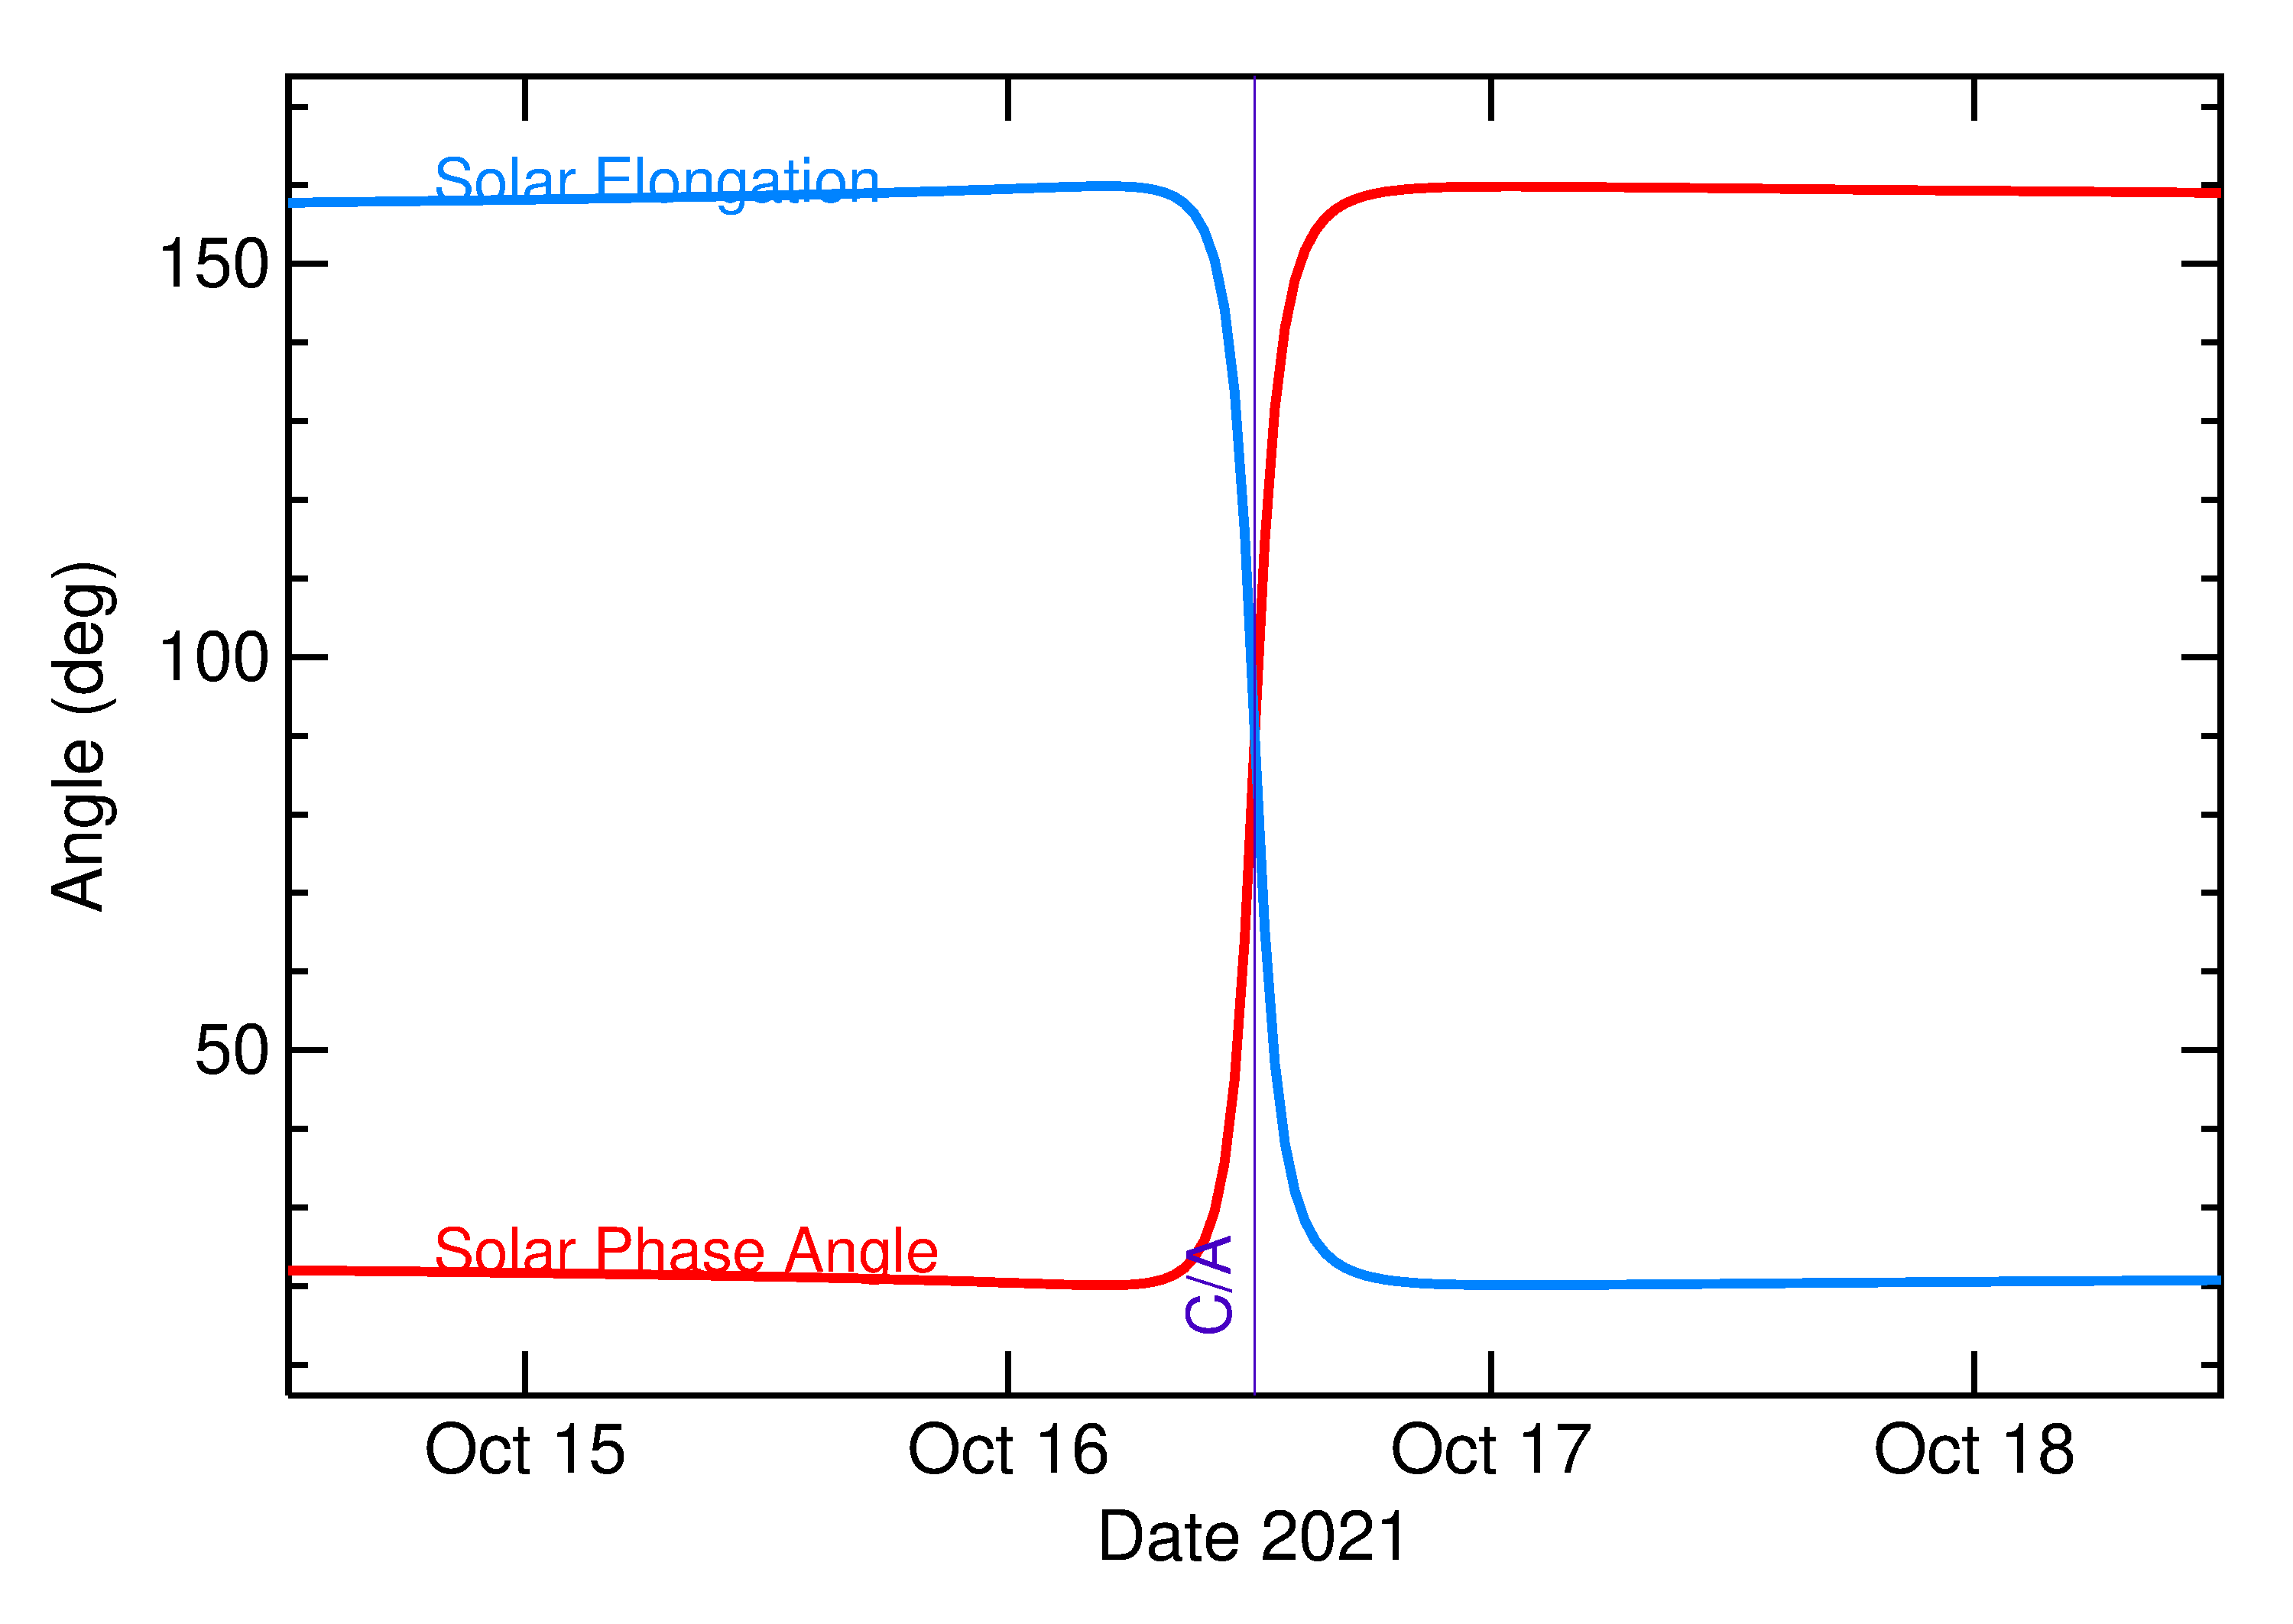 Solar Elongation and Solar Phase Angle of 2021 UL in the days around closest approach